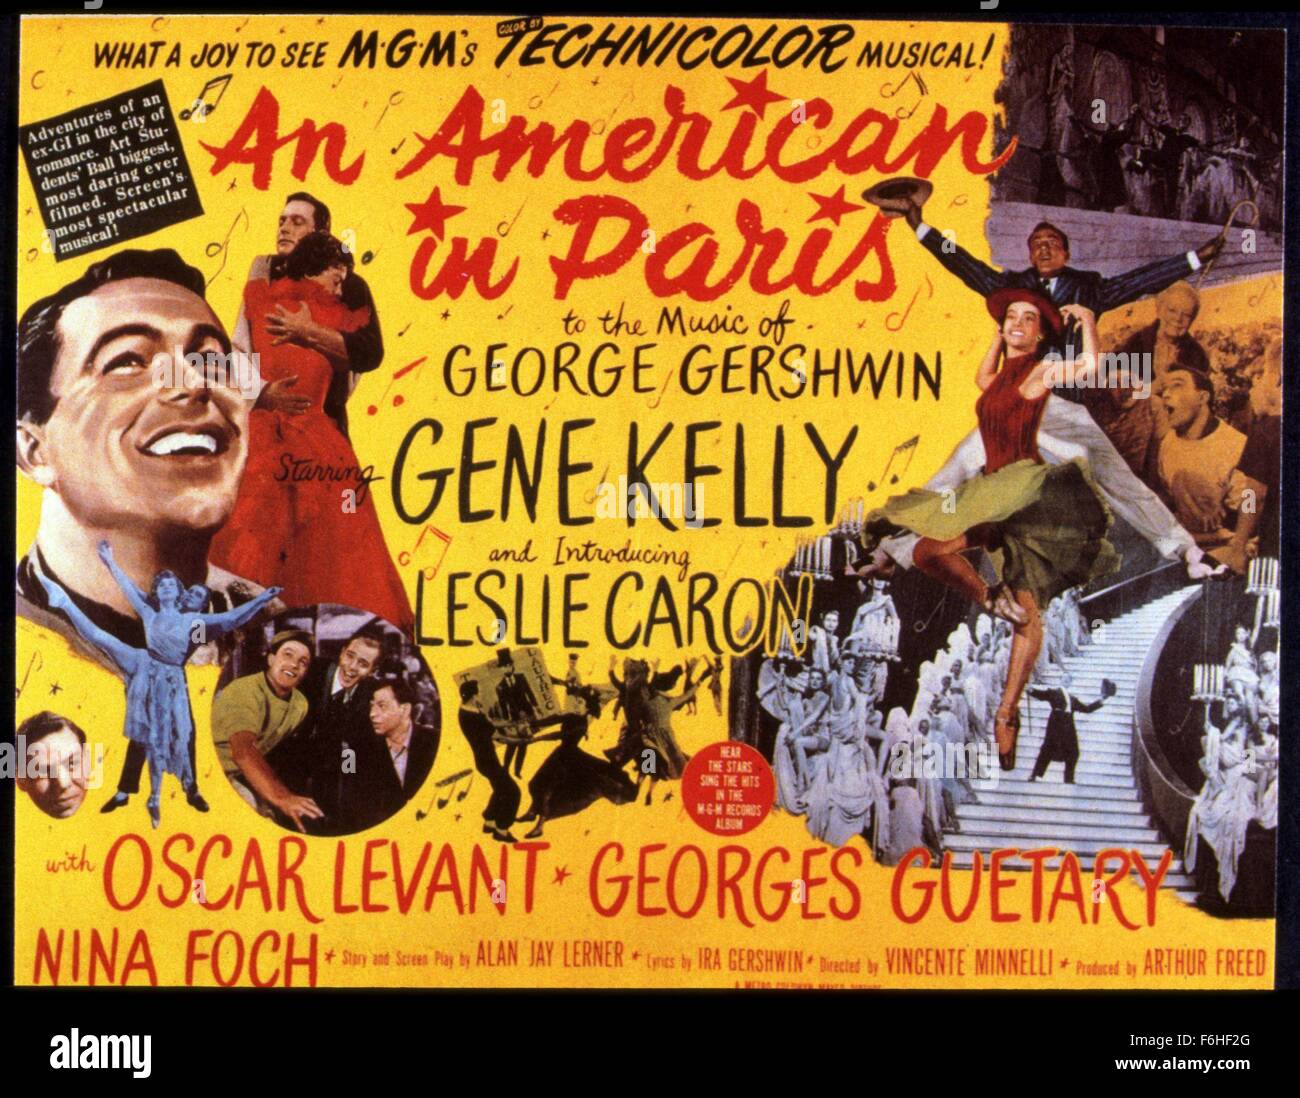 1951, Film Title: AMERICAN IN PARIS, Director: VINCENTE MINNELLI, Studio: MGM, Pictured: ILLUSTRATION, 1951, AWARDS - ACADEMY, BEST PICTURE, LESLIE CARON, DANCING, GENE KELLY, VINCENTE MINNELLI, OSCAR RETRO, OSCAR POSTER. (Credit Image: SNAP) Stock Photo